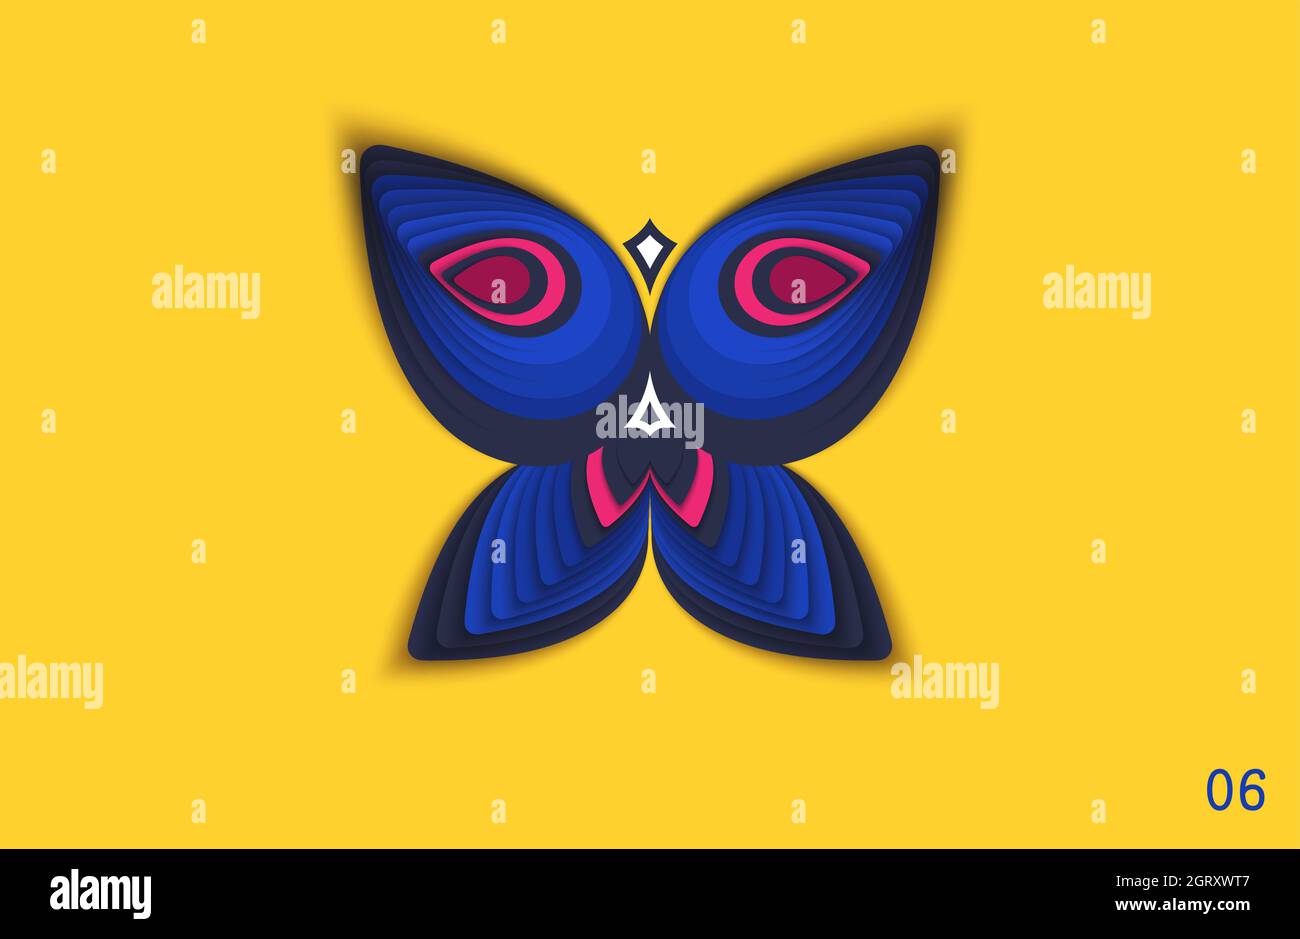 Fantasy butterfly. Paper art design element composed by overlapping elements. Strict and symmetrical 3D layered structure. Vector illustration Stock Vector